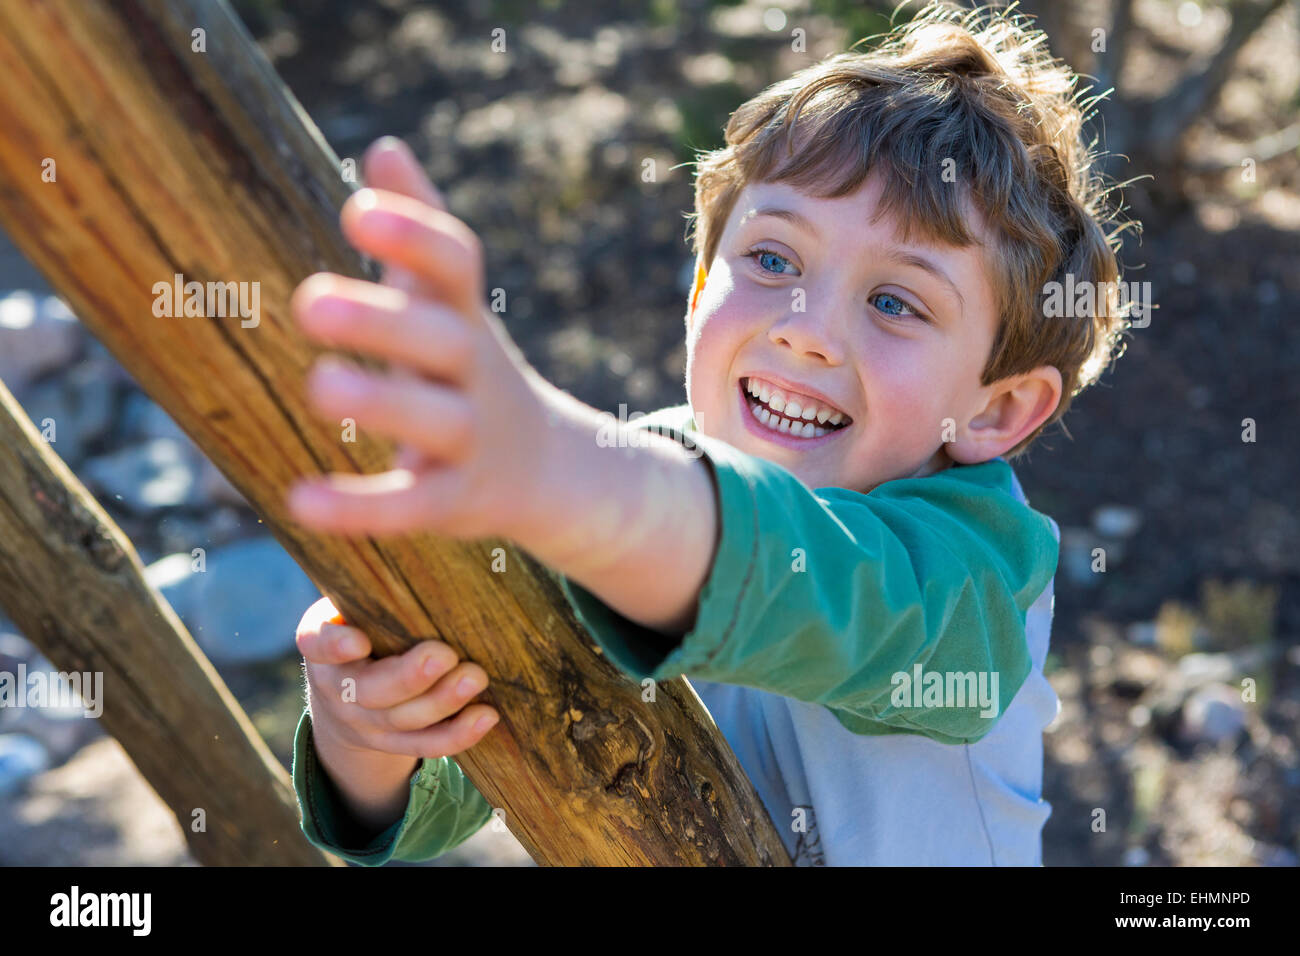 Portrait of boy reaching for tree branch Banque D'Images